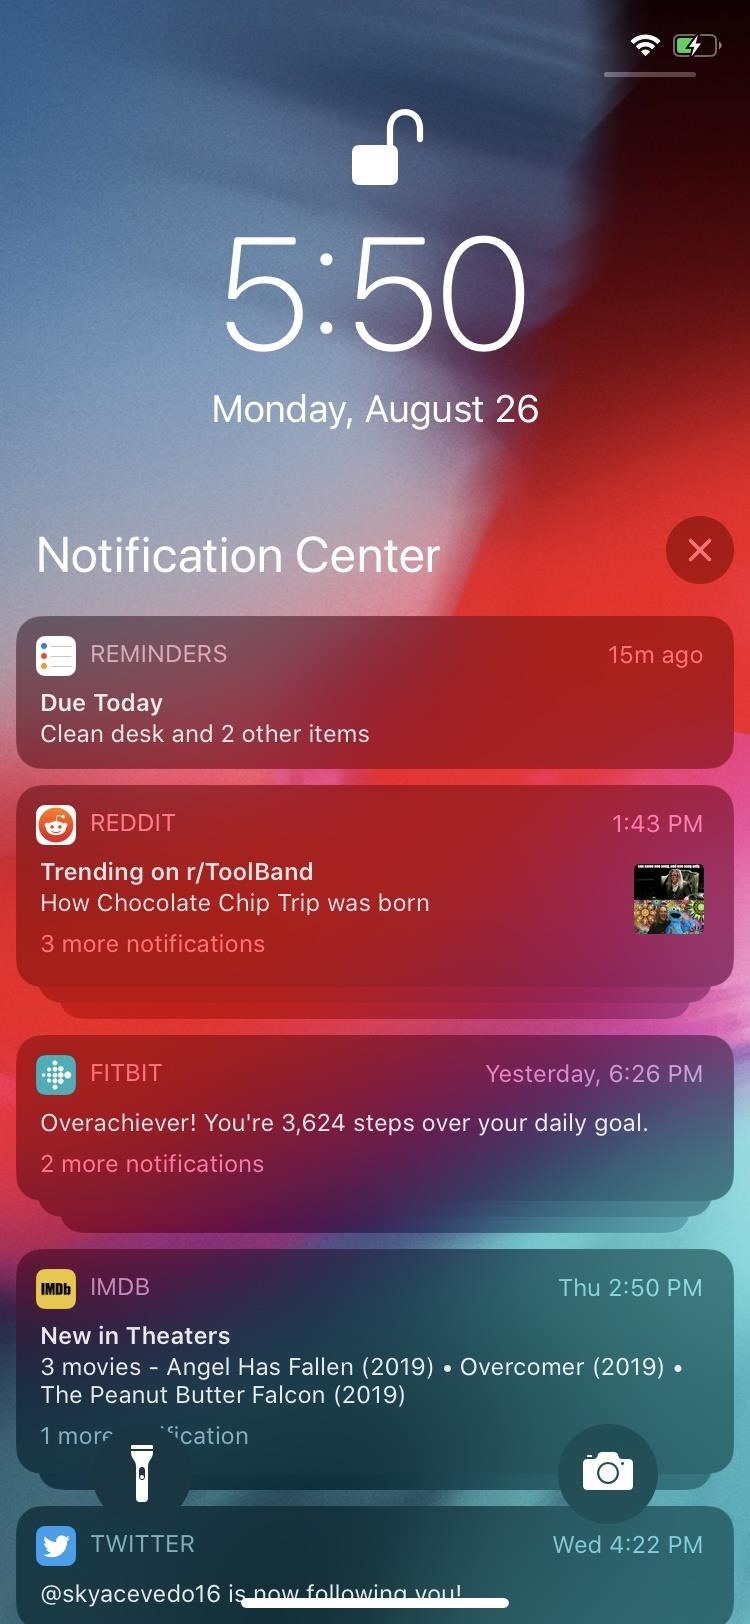 15 Awesome 'Reminders' Features in iOS 13 That'll Make You Actually Want to Use the App